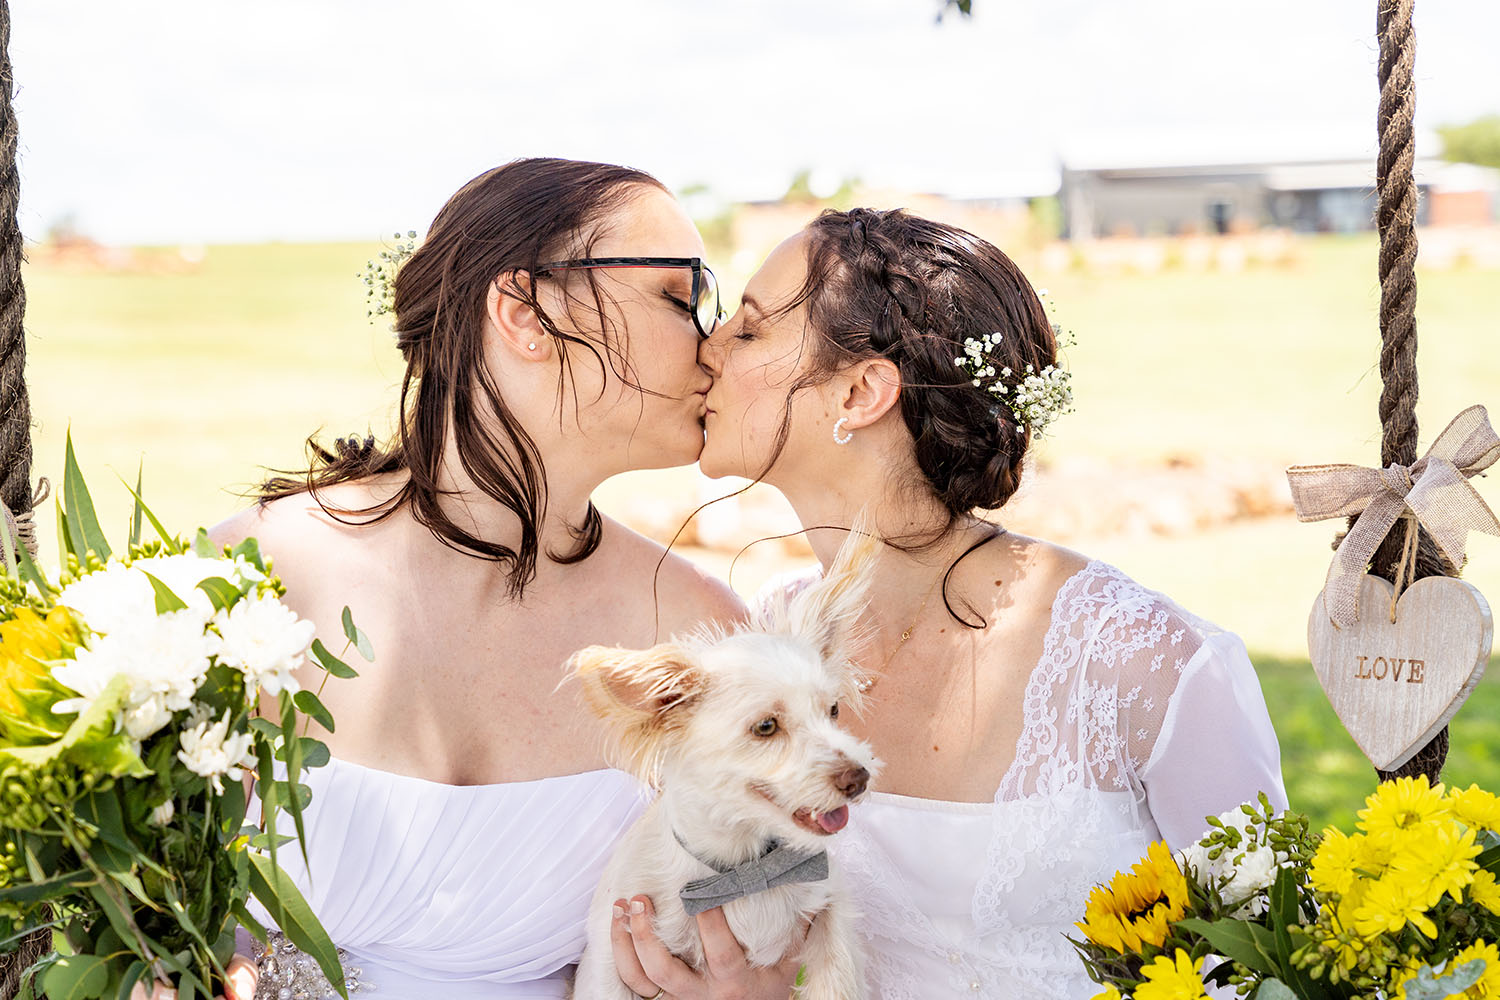 Wedding Photography - Kissing Brides with dog